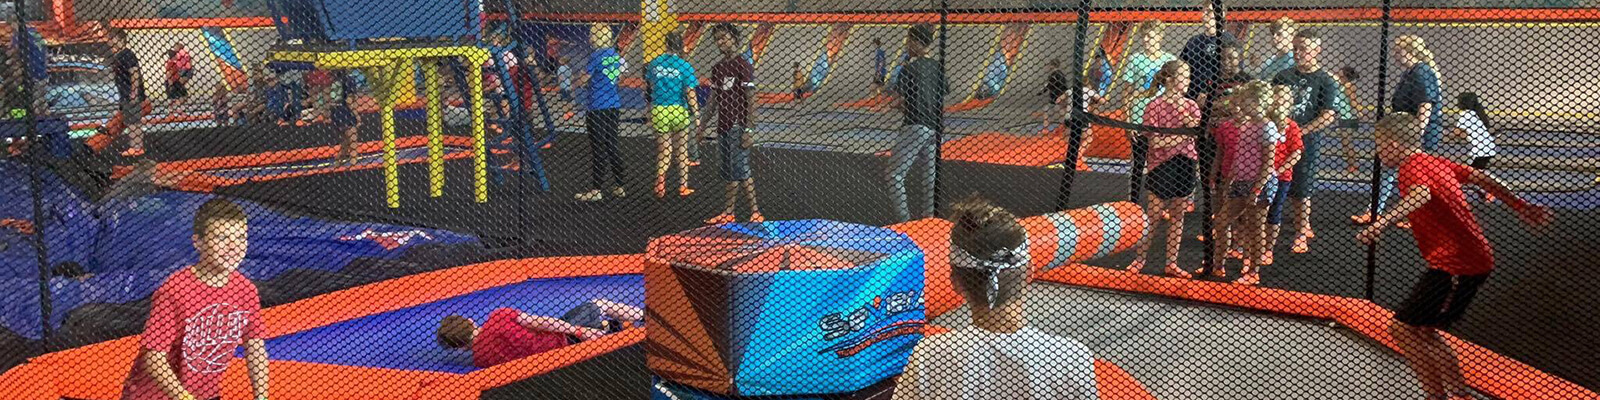 Sevier Air Trampoline Ninja Warrior Park Coupons Save 2.00 Per Person